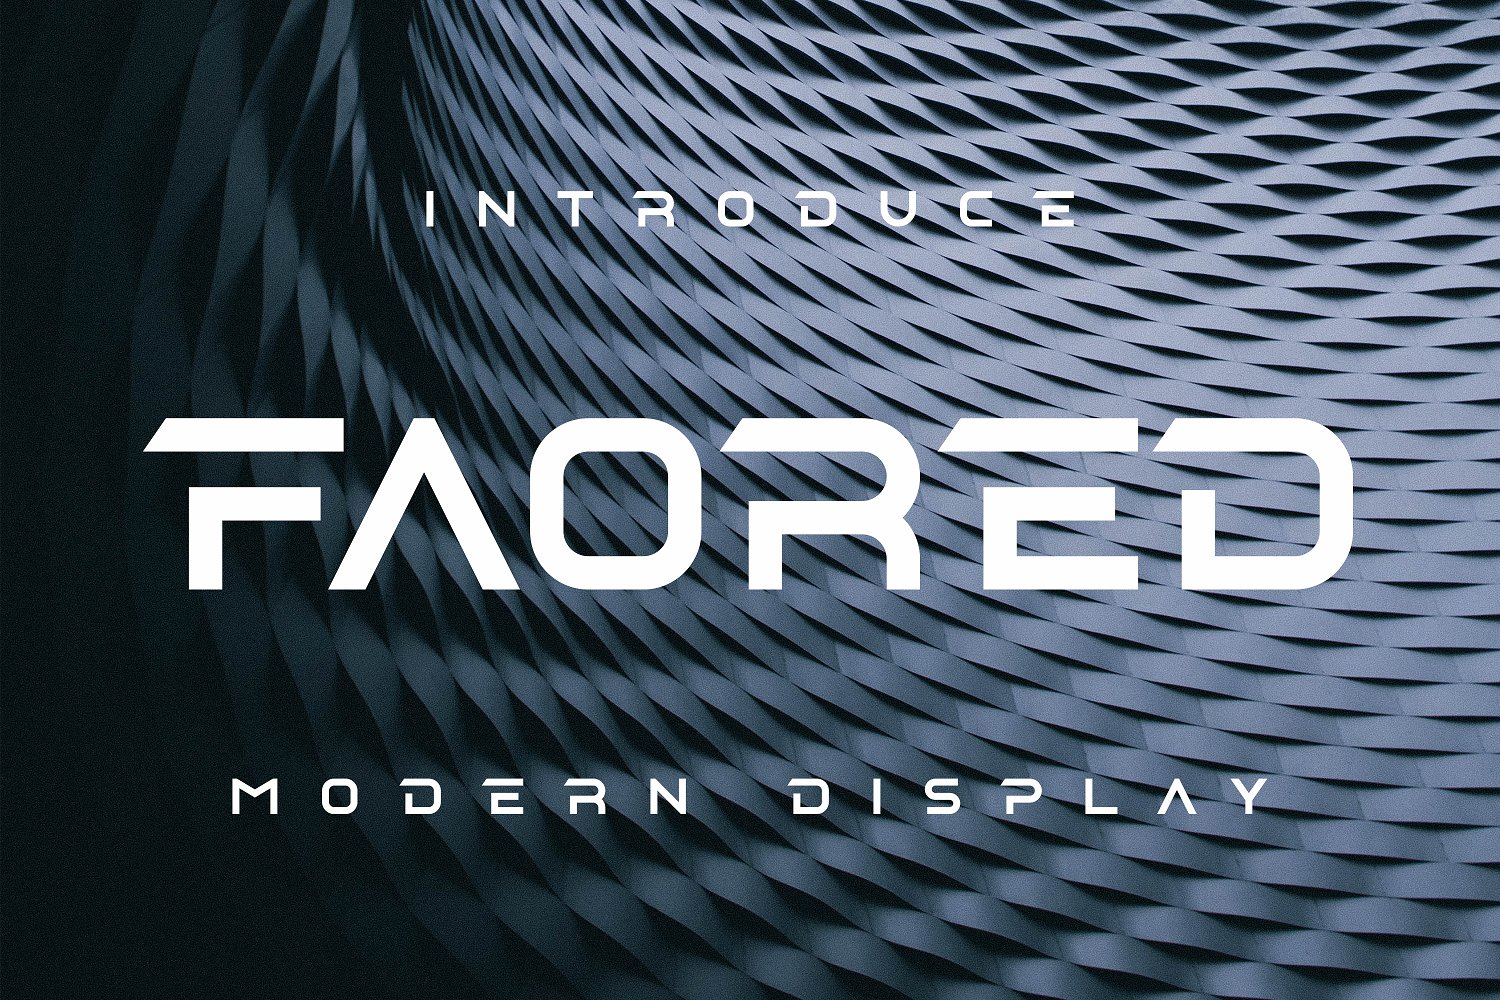 Faoredpreview image.